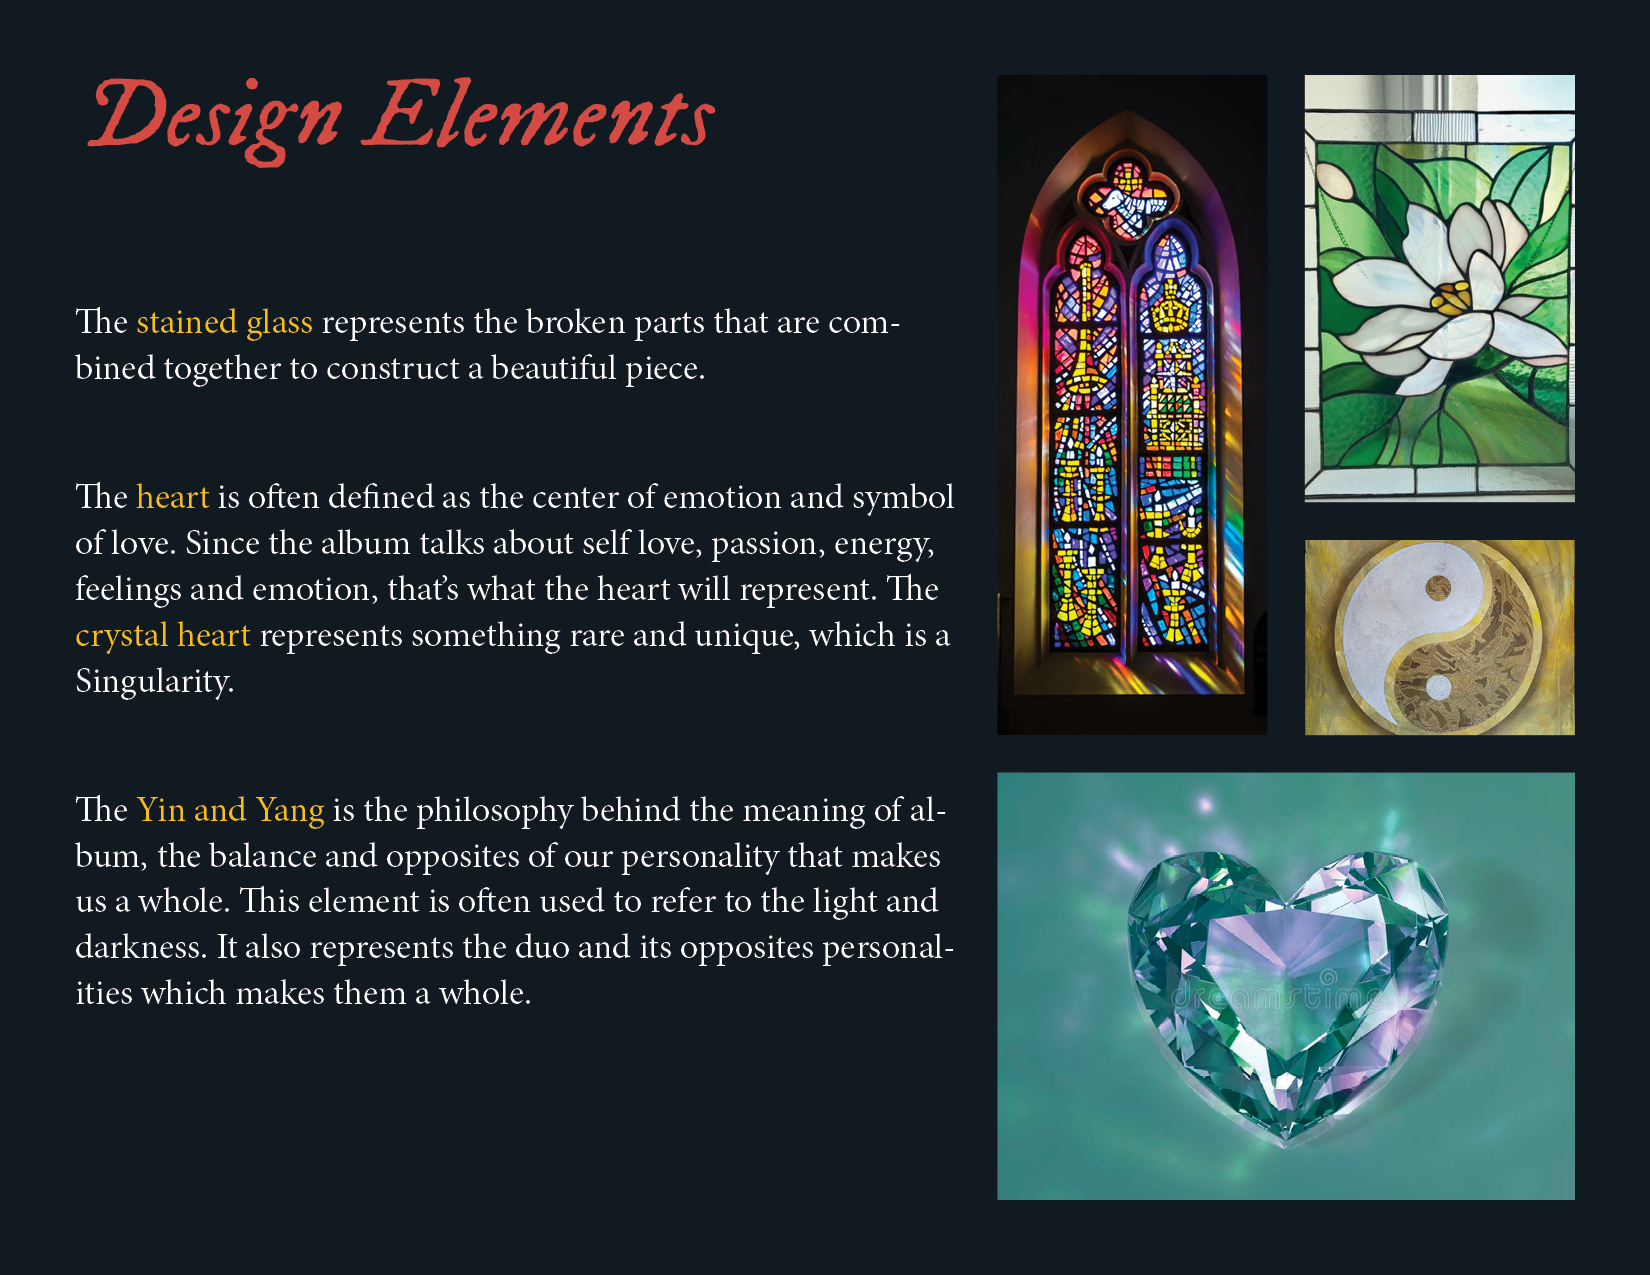 This are images of stained glass with text.